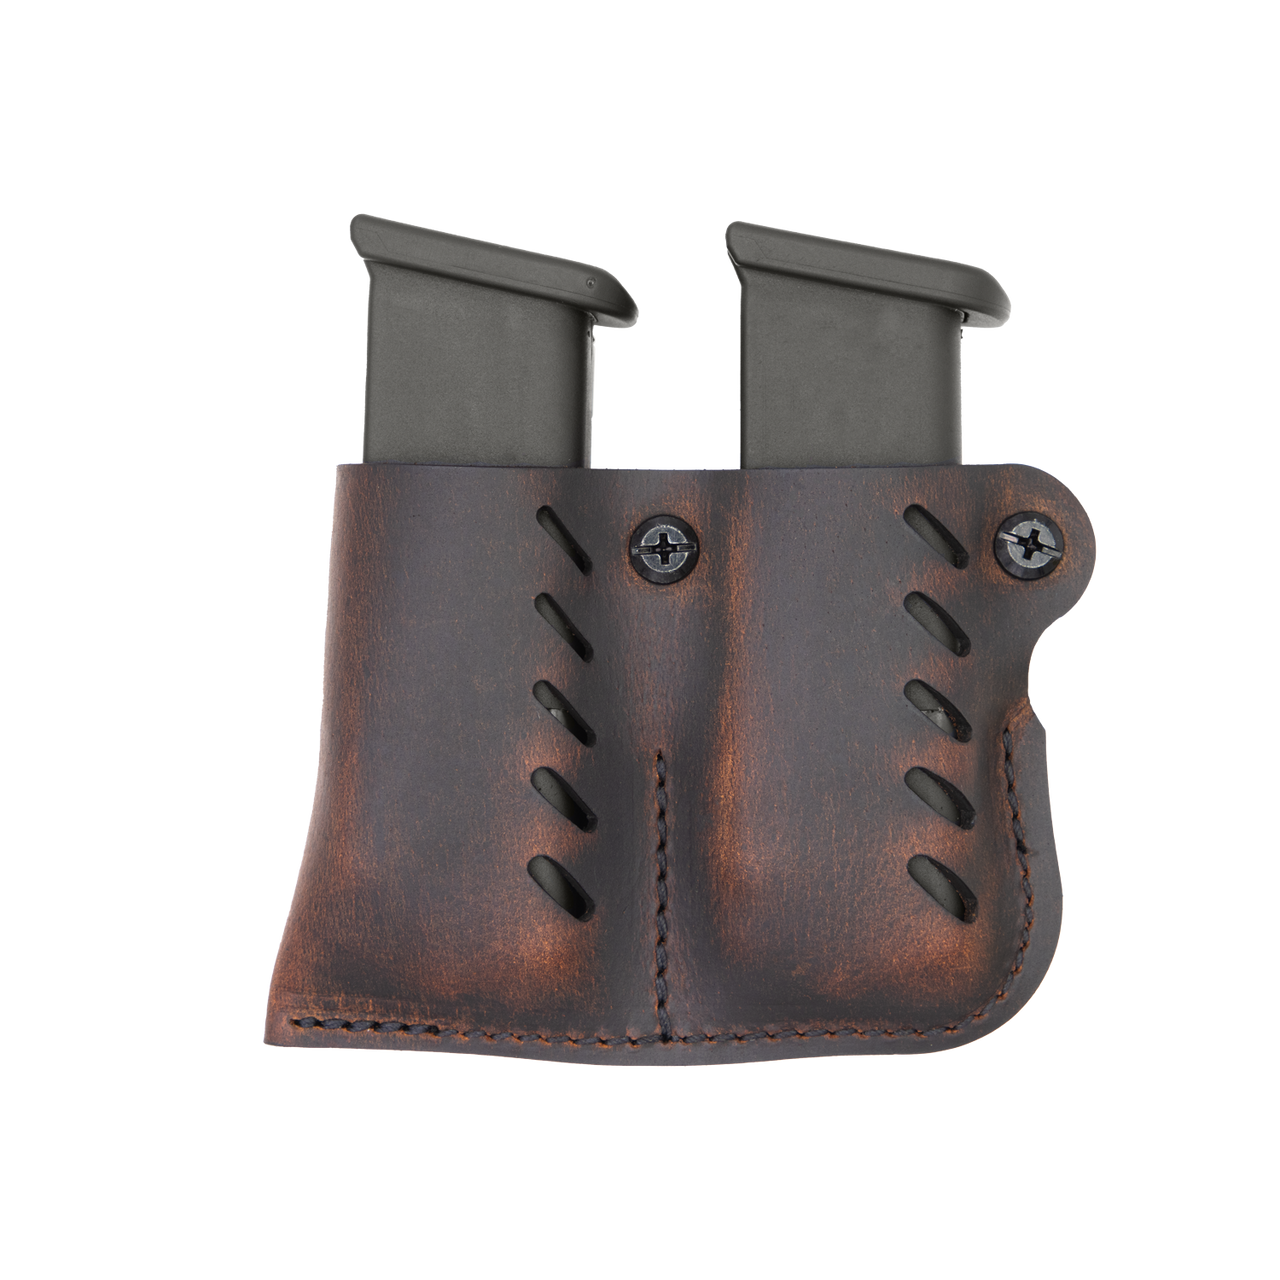 Double Adjustable Magazine Pouch - Distressed Brown - Versacarry